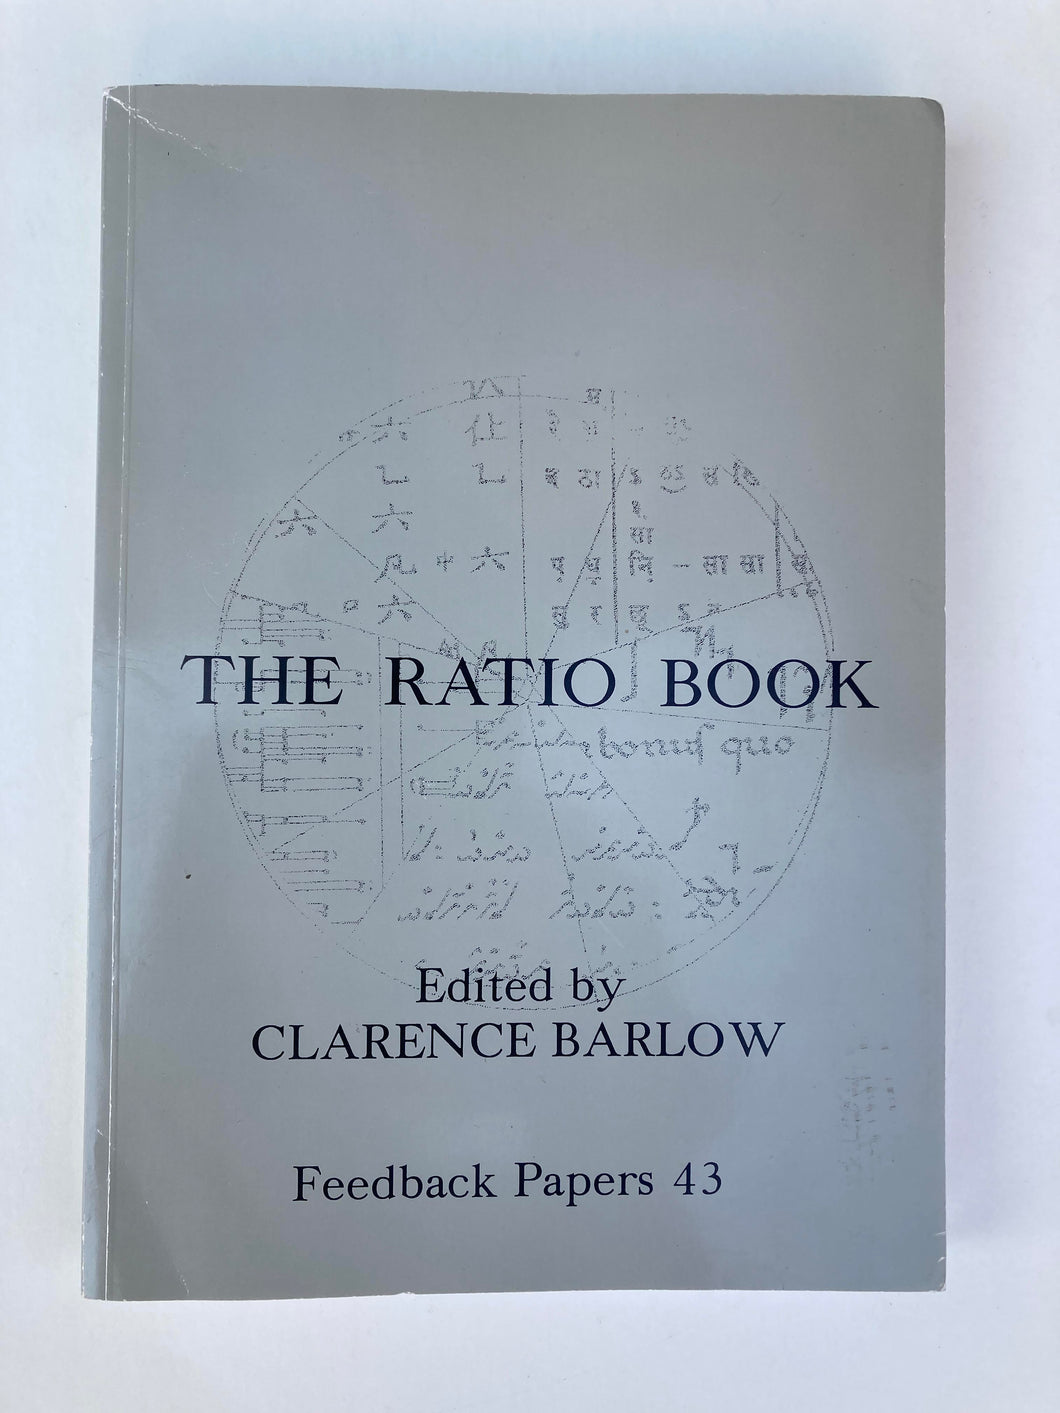 The Ratio Book ed. Clarence Barlow